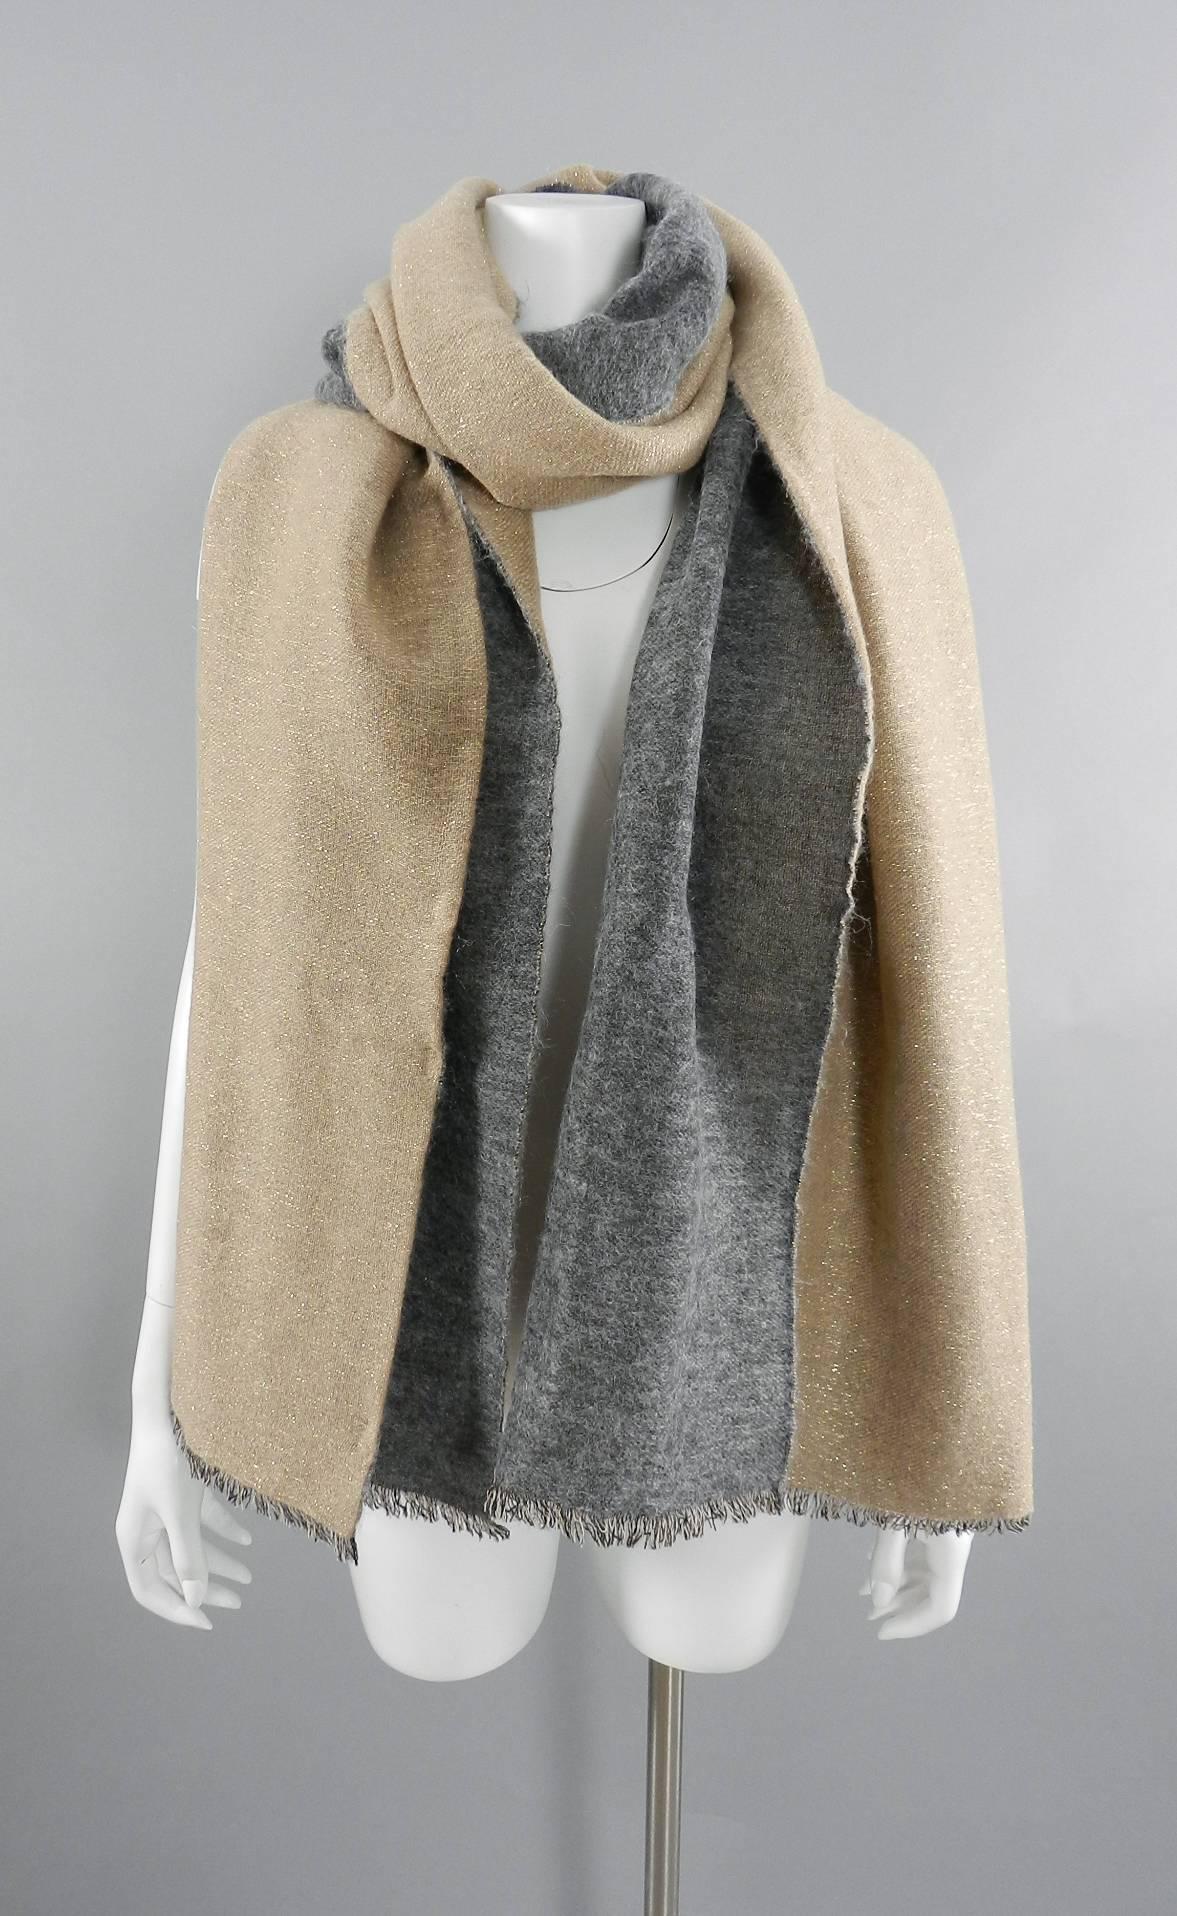 Brunello Cucinelli Gold and Grey Double Sided Large Cashmere Scarf Shawl Wrap.  Beige with gold metallic shimmer thread on one side and solid gray on the other. Fringed hem.  Measures 92 x 27